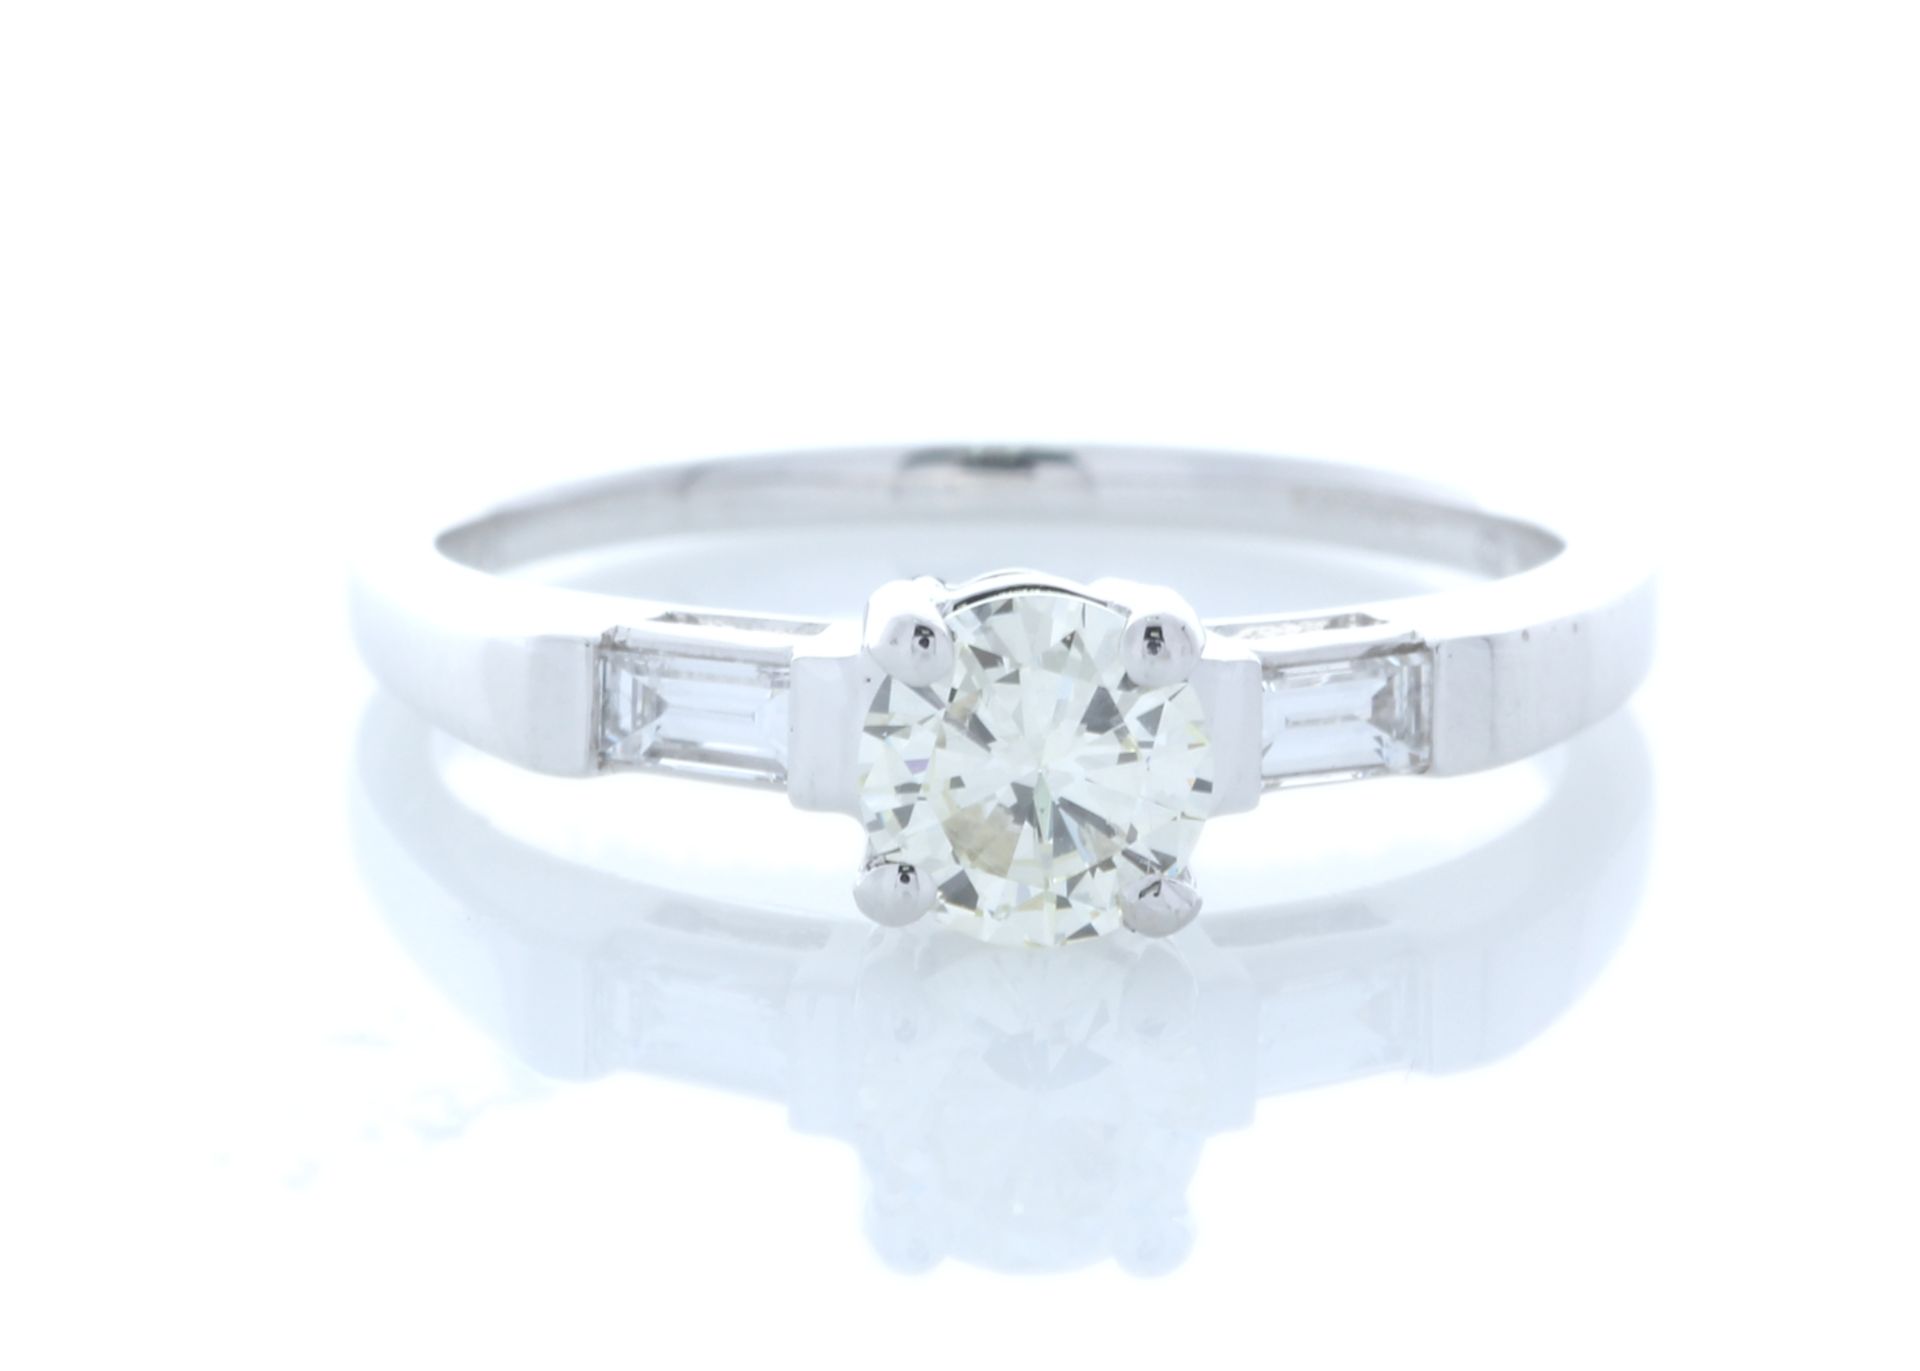 18ct White Gold Single Stone With Halo Setting Ring (0.51) 0.67 Carats - Valued by GIE £6,625.00 - A